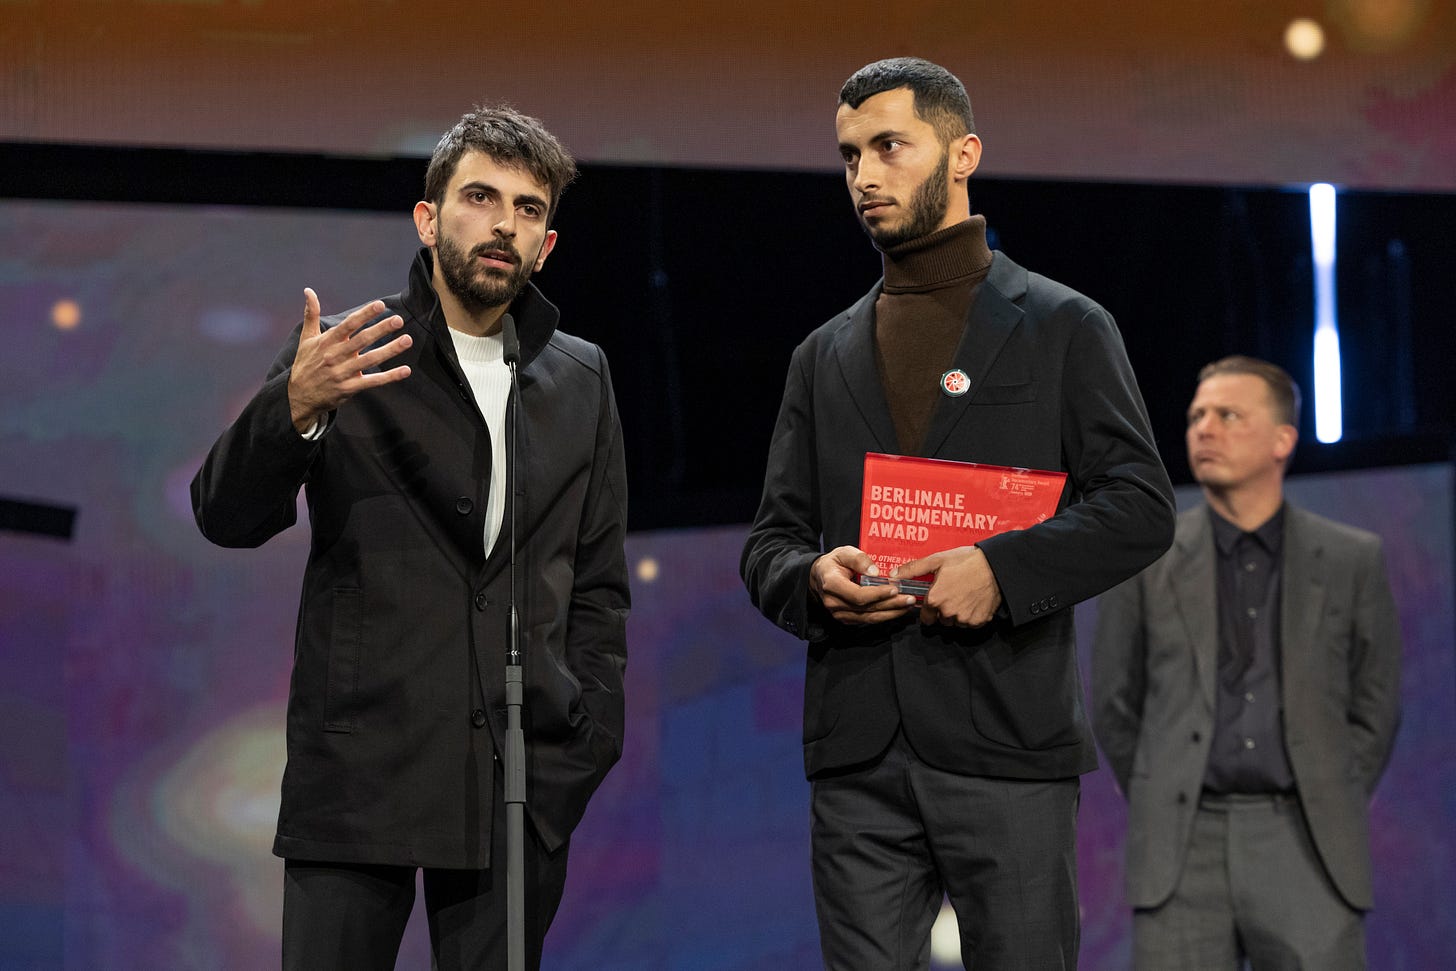 Yuval Abraham and Basel Adra winning for ‘No Other Land’ berlinale